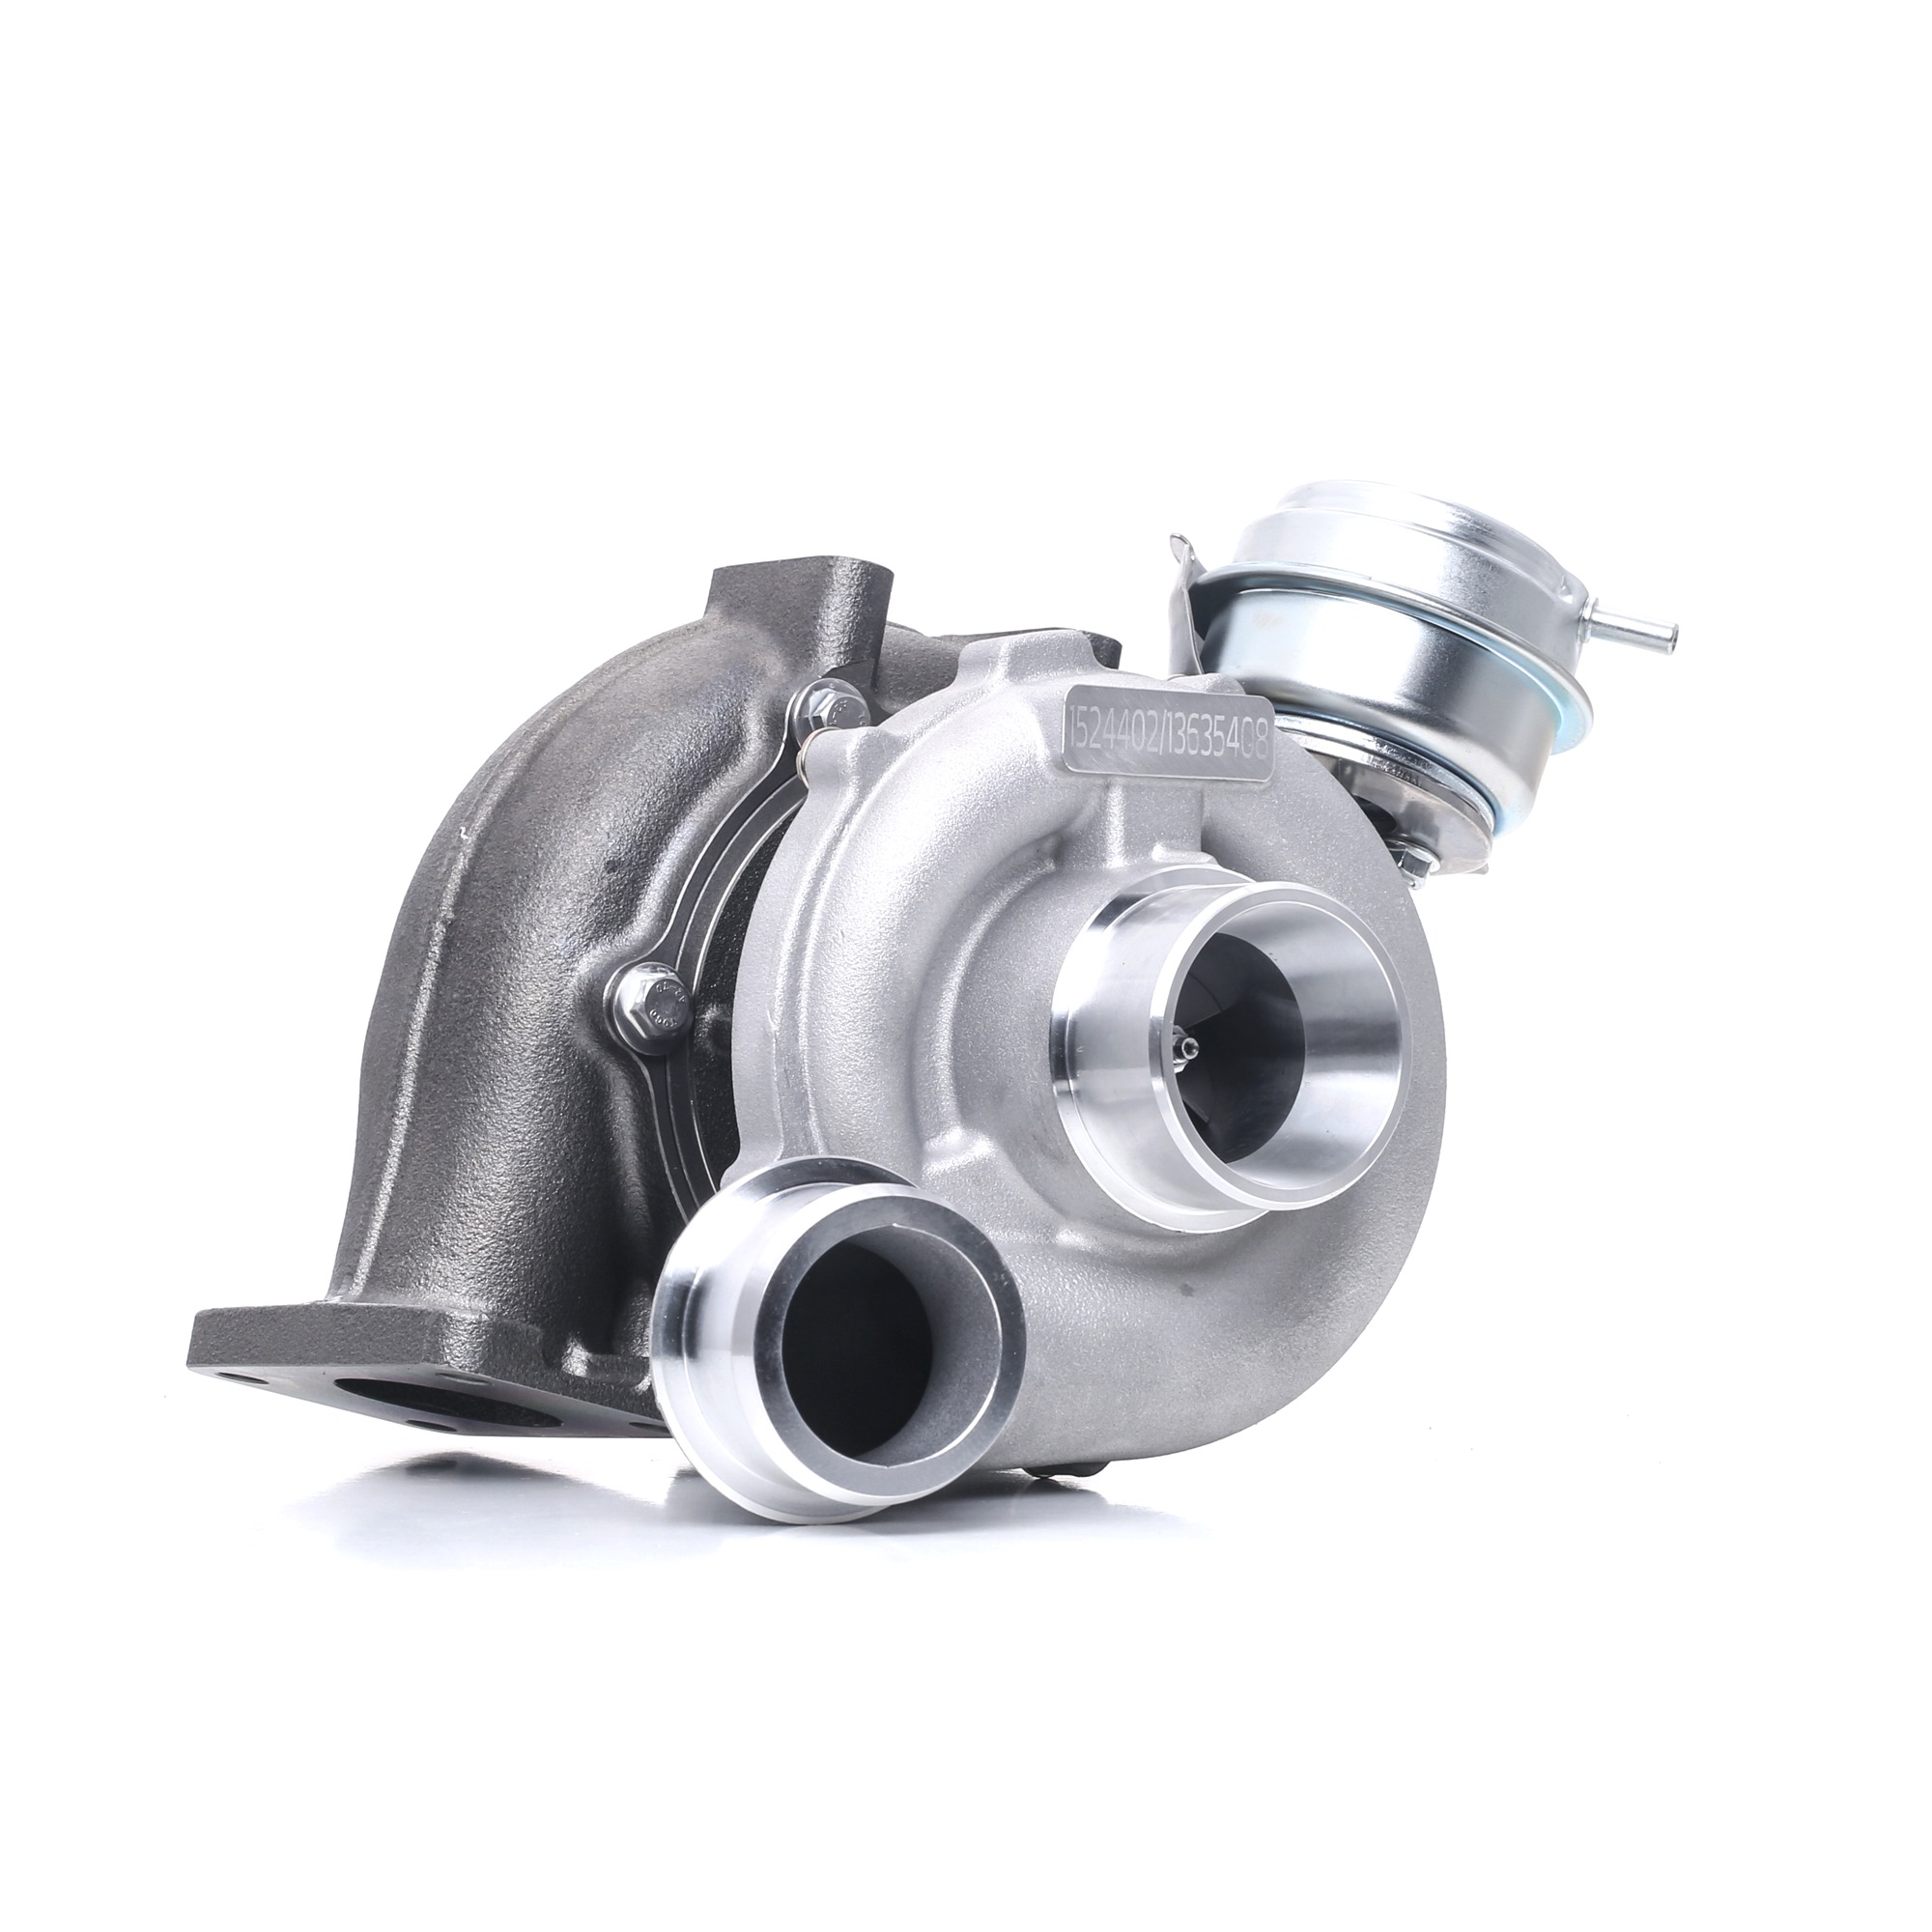 RIDEX 2234C0047 Turbocharger Exhaust Turbocharger, Euro 3, Pneumatic, without attachment material